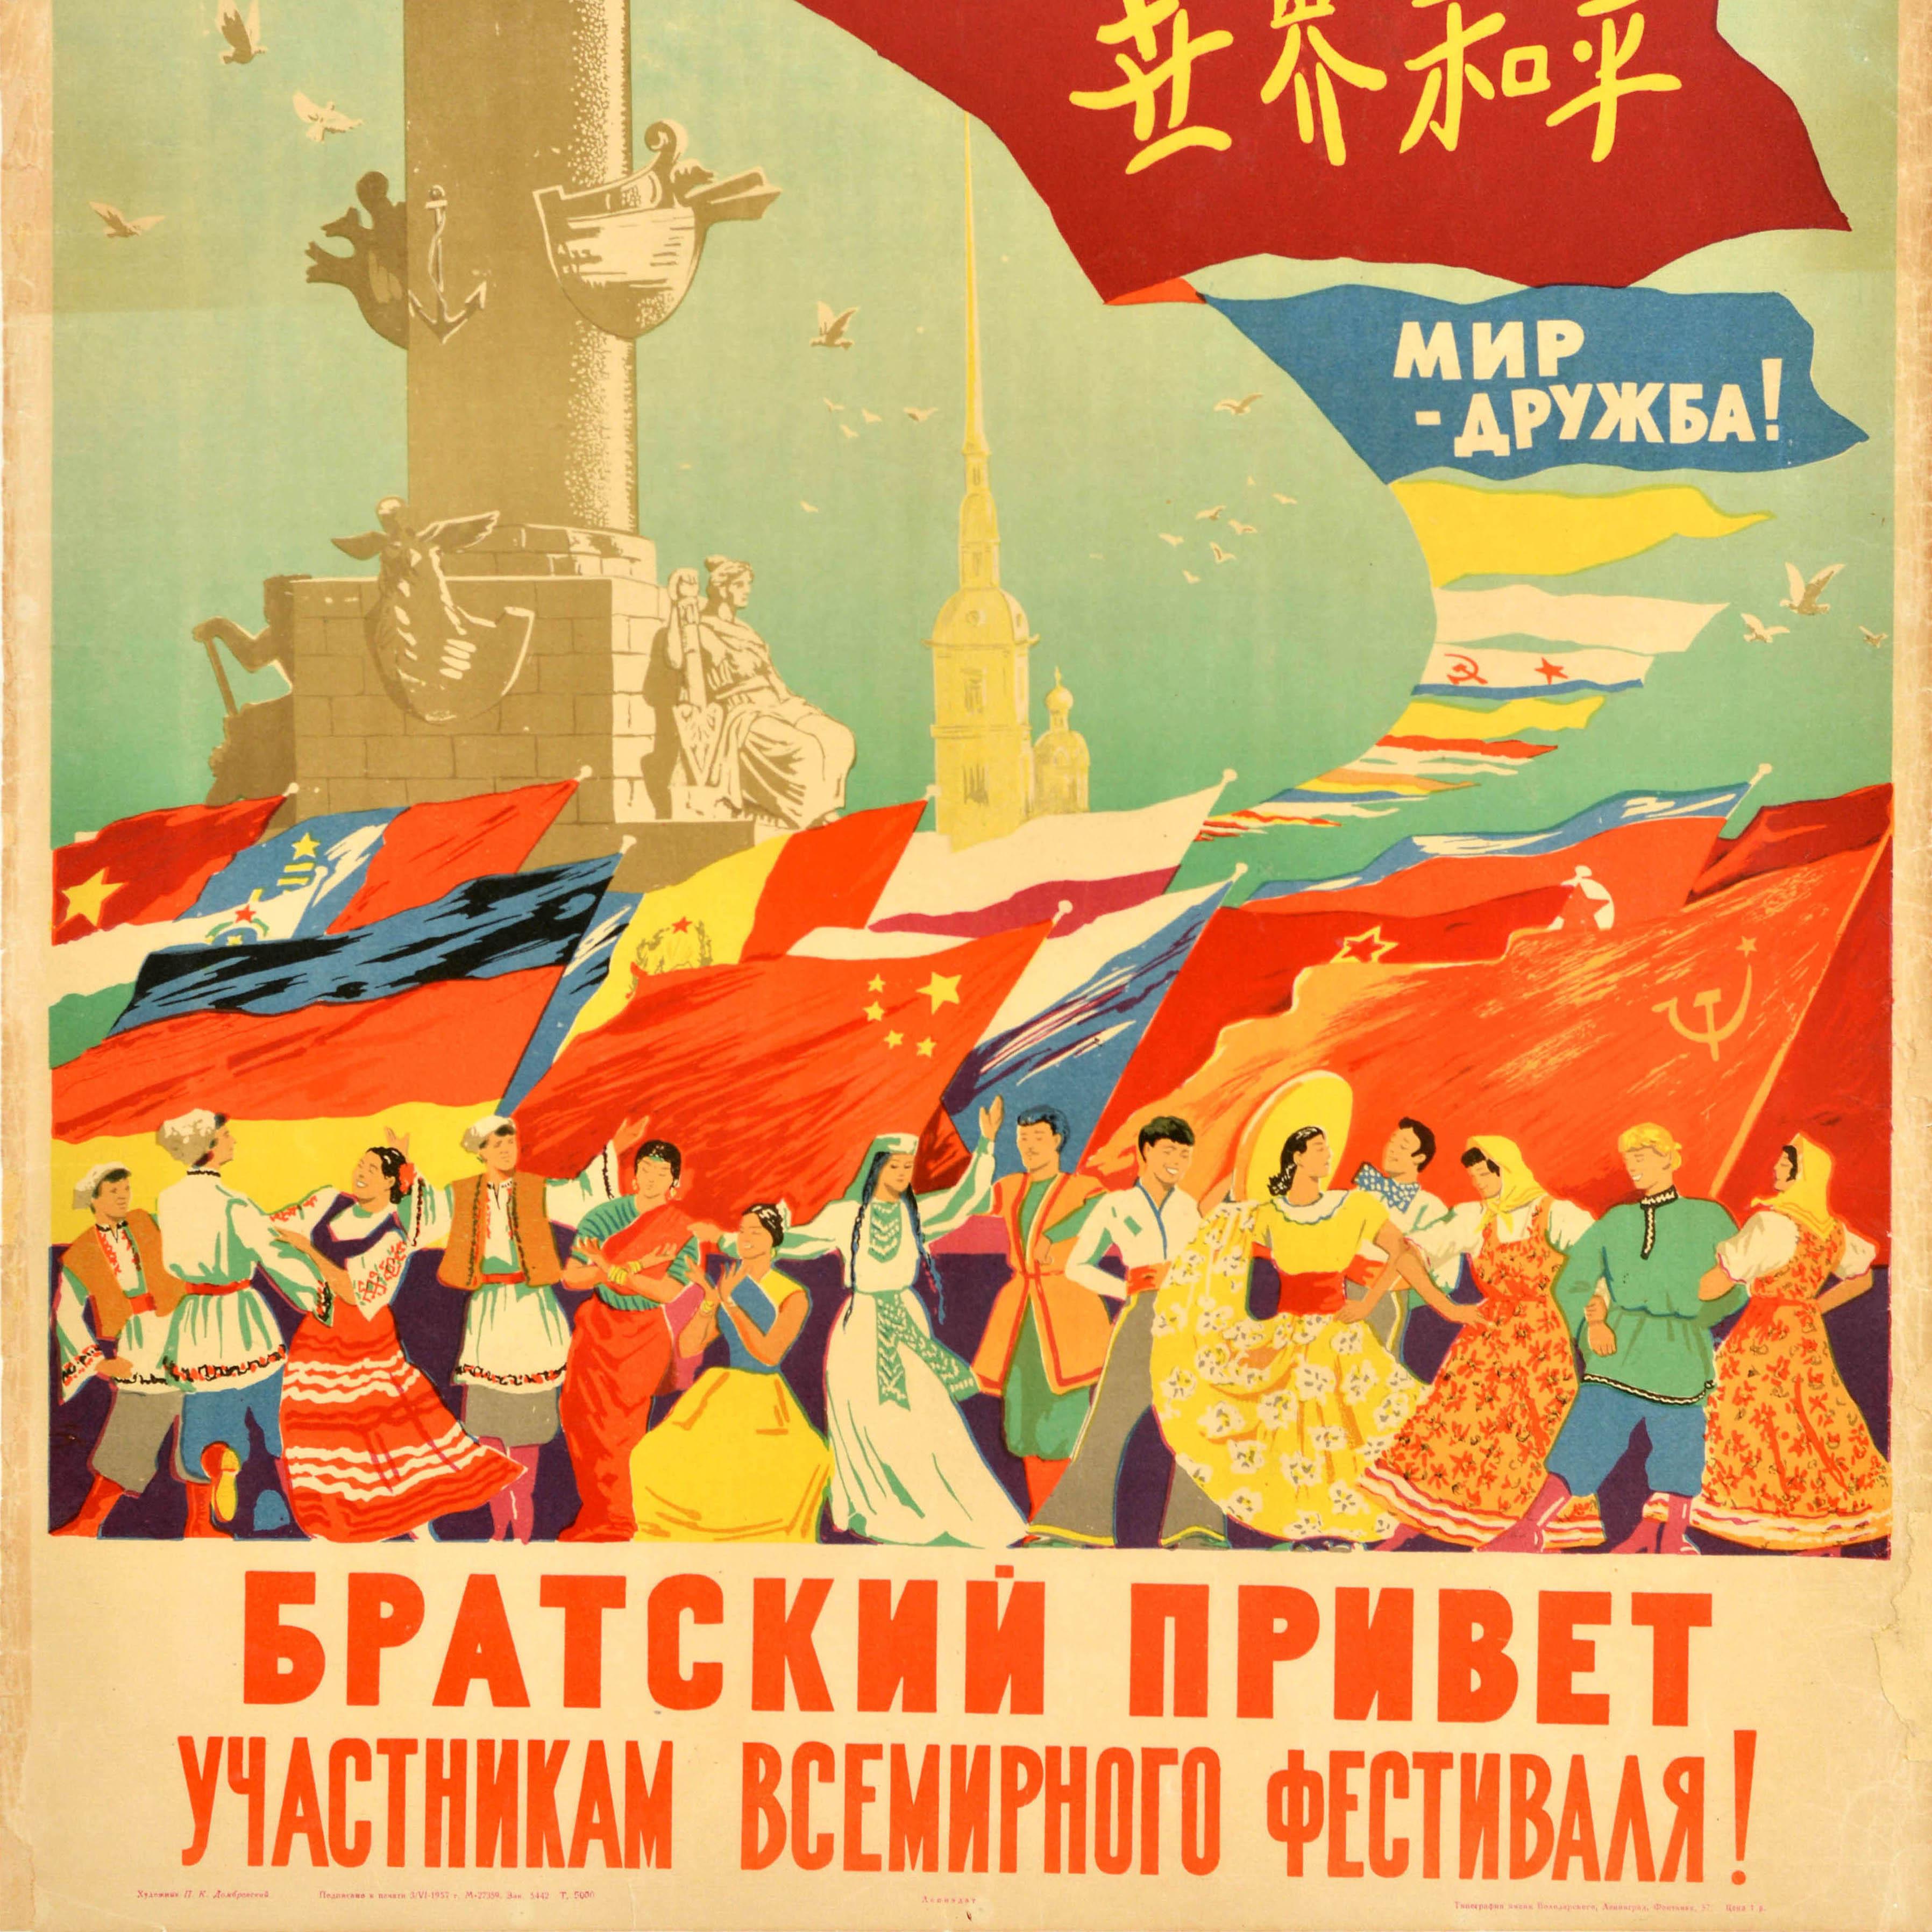 Original vintage Soviet propaganda poster for the 6th World Festival of Youth and Students featuring a colourful illustration of people from different countries dressed in their national costumes and dancing together below flags and banners in